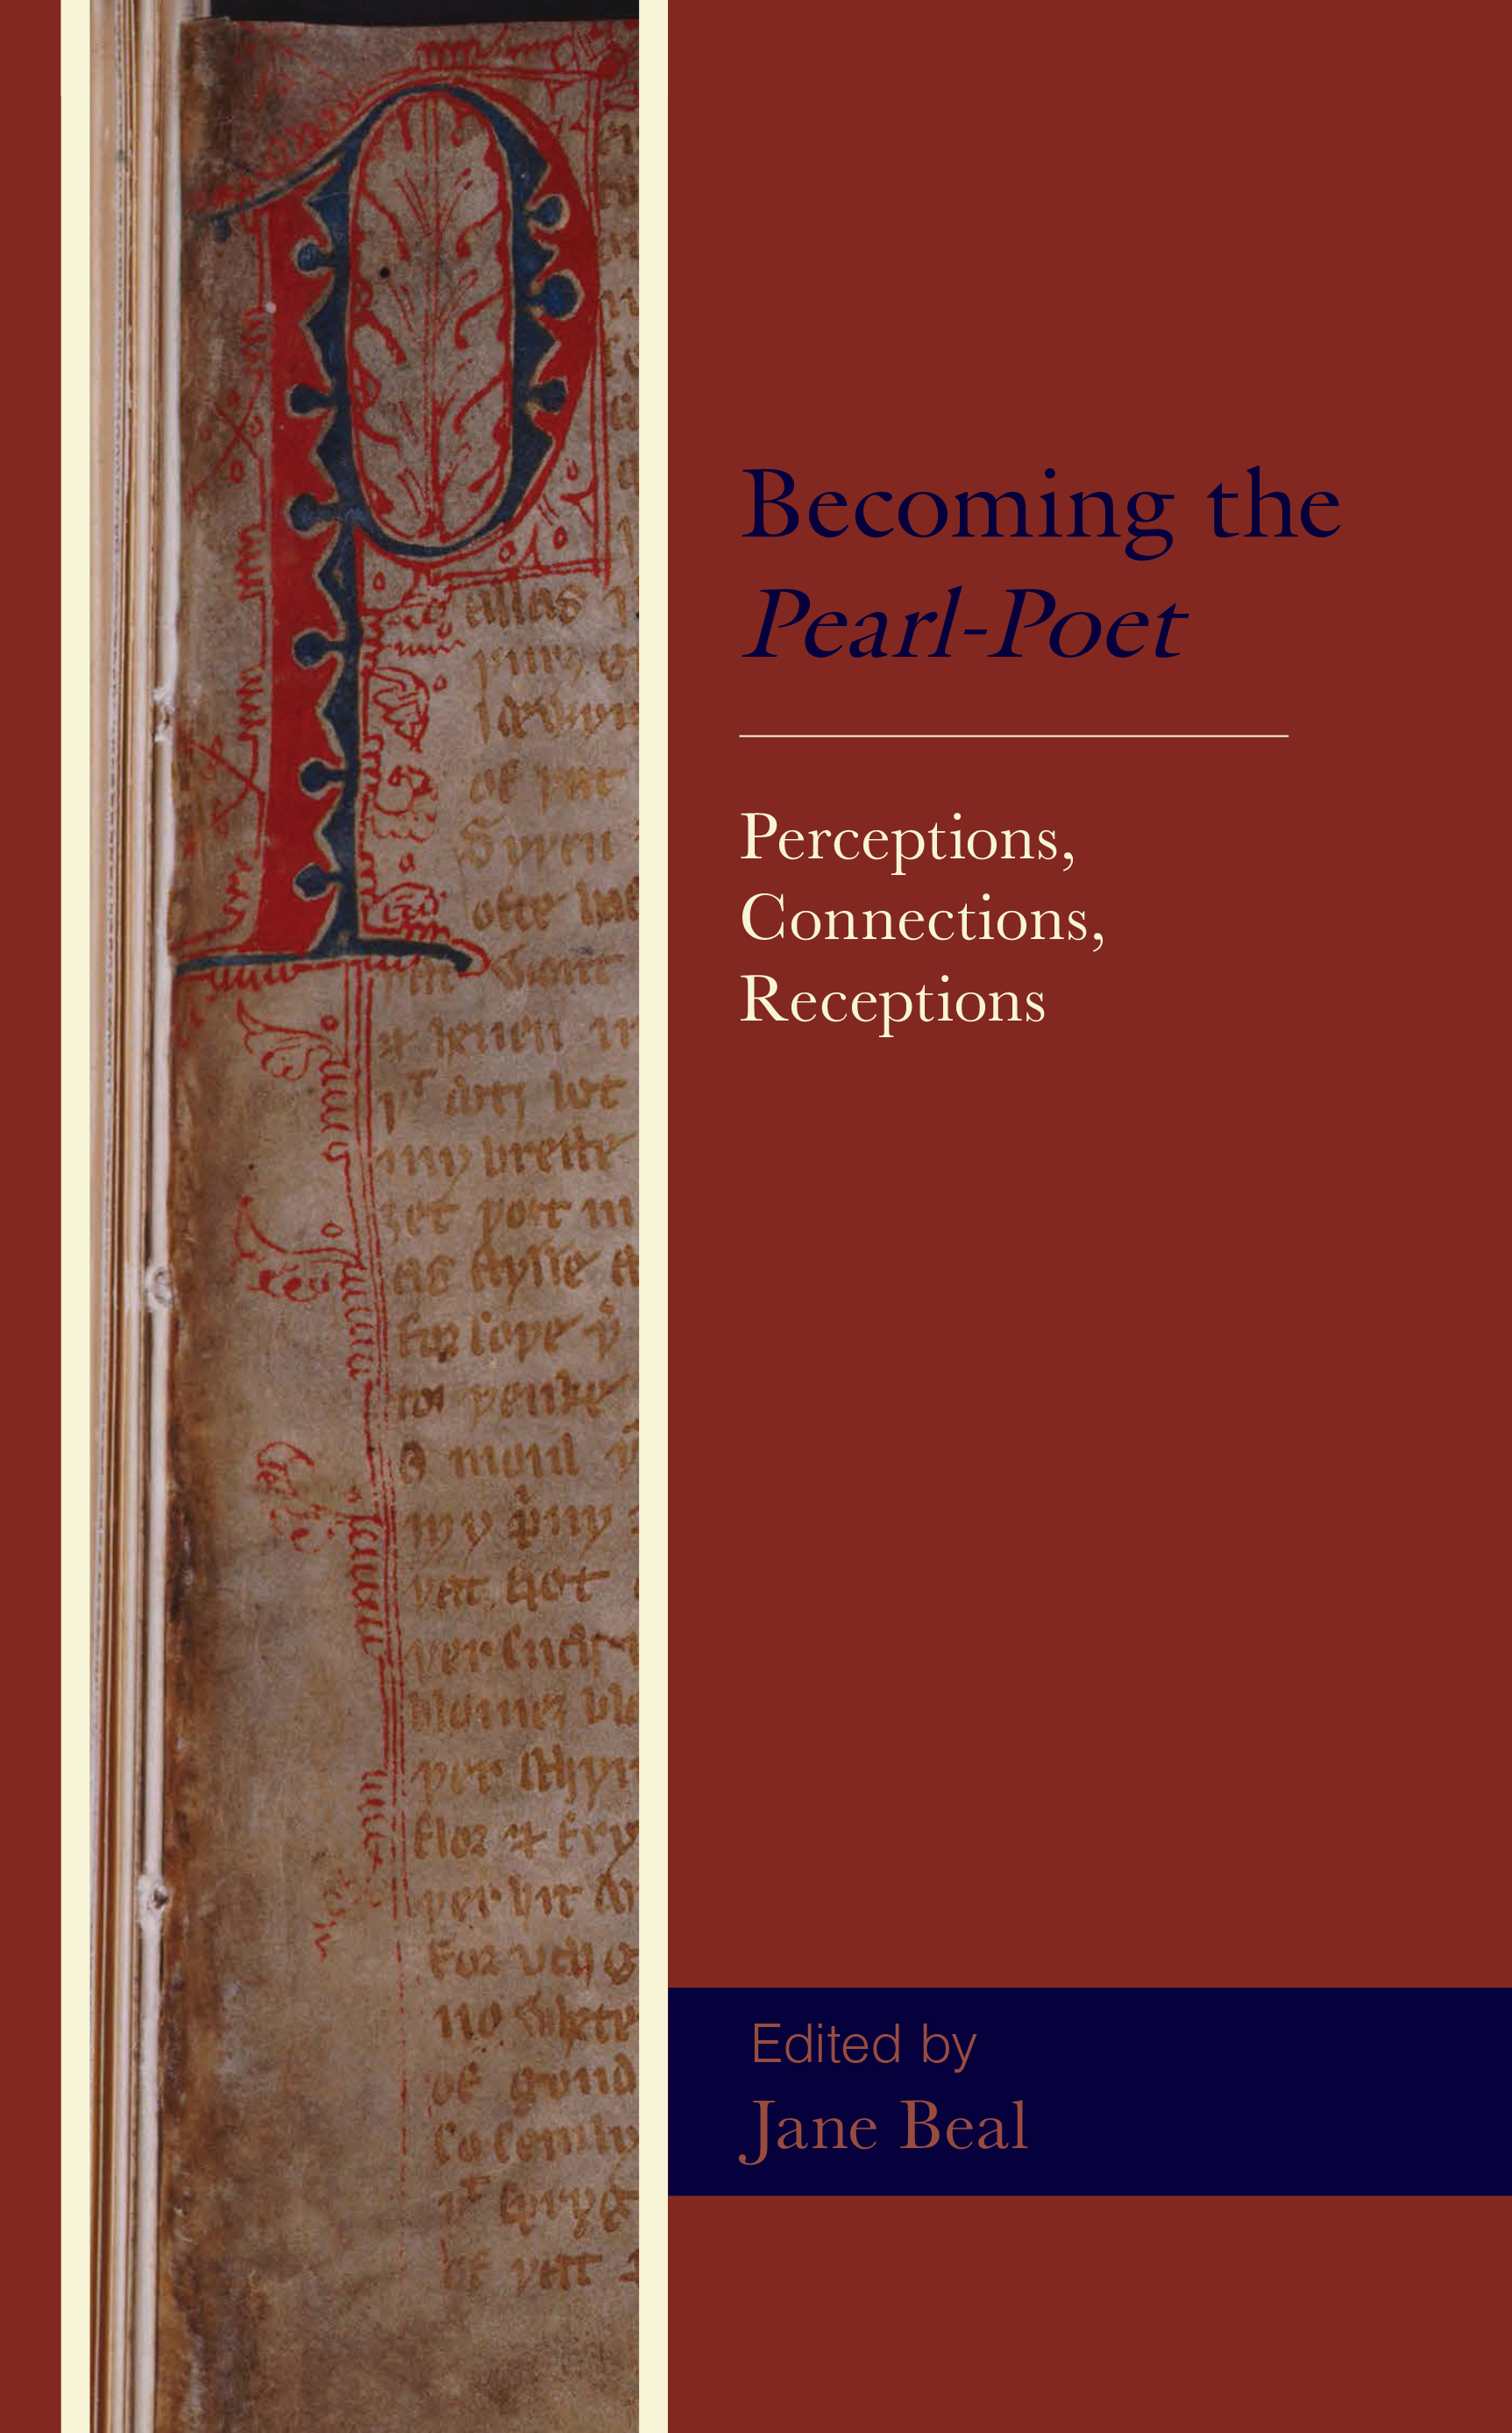 Becoming the Pearl-Poet: Perceptions, Connections, Receptions